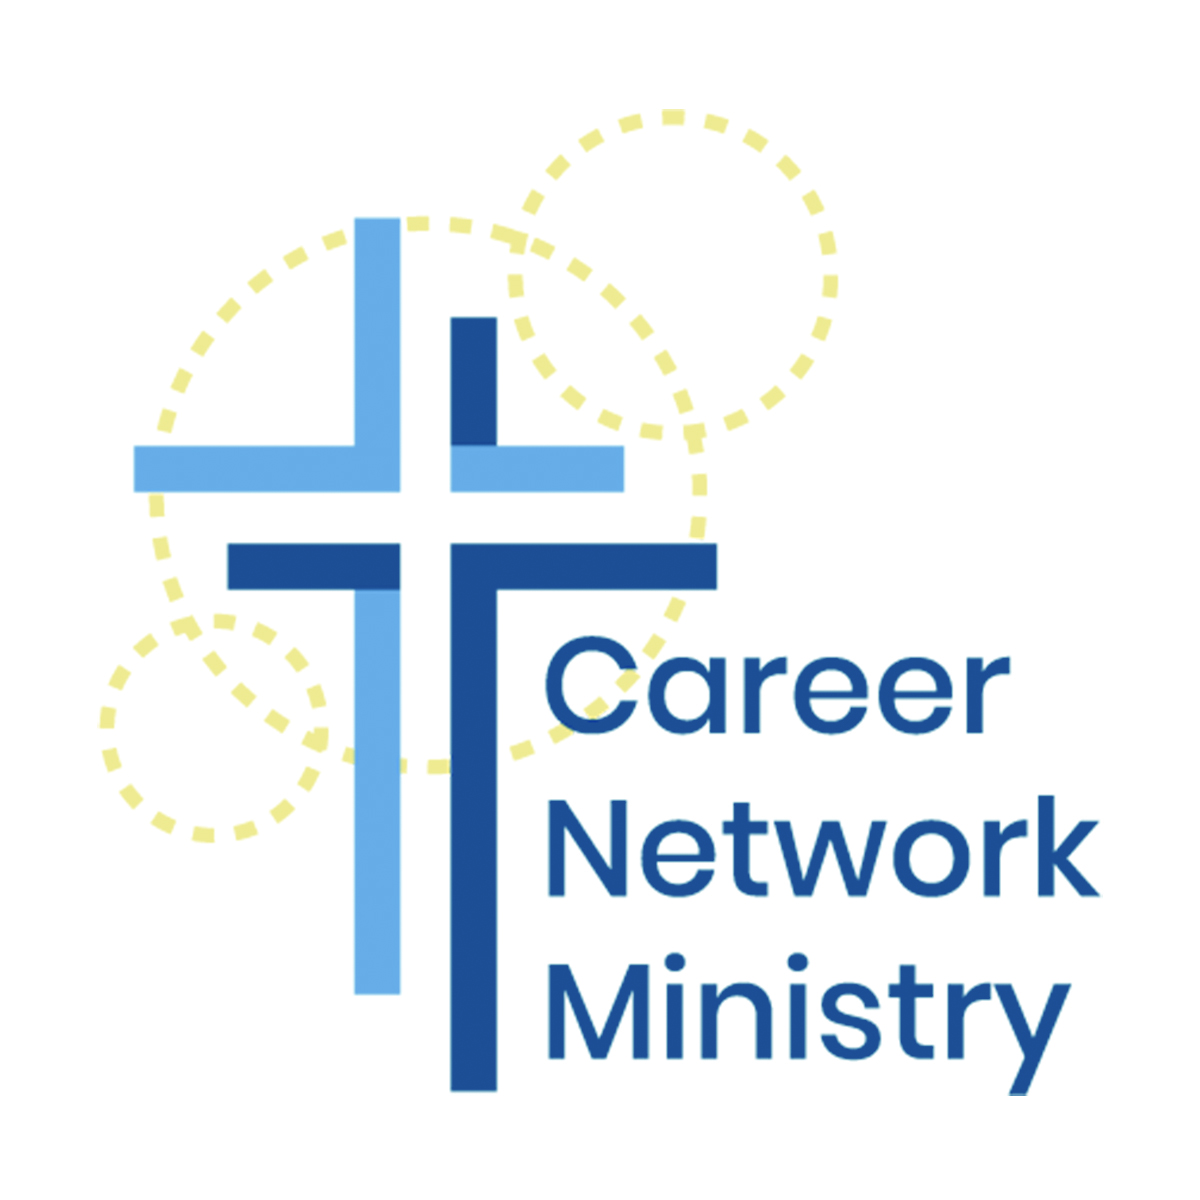 Career Network Ministry:  Assists With Job Loss, Career Enhancement – By Janice Lewine